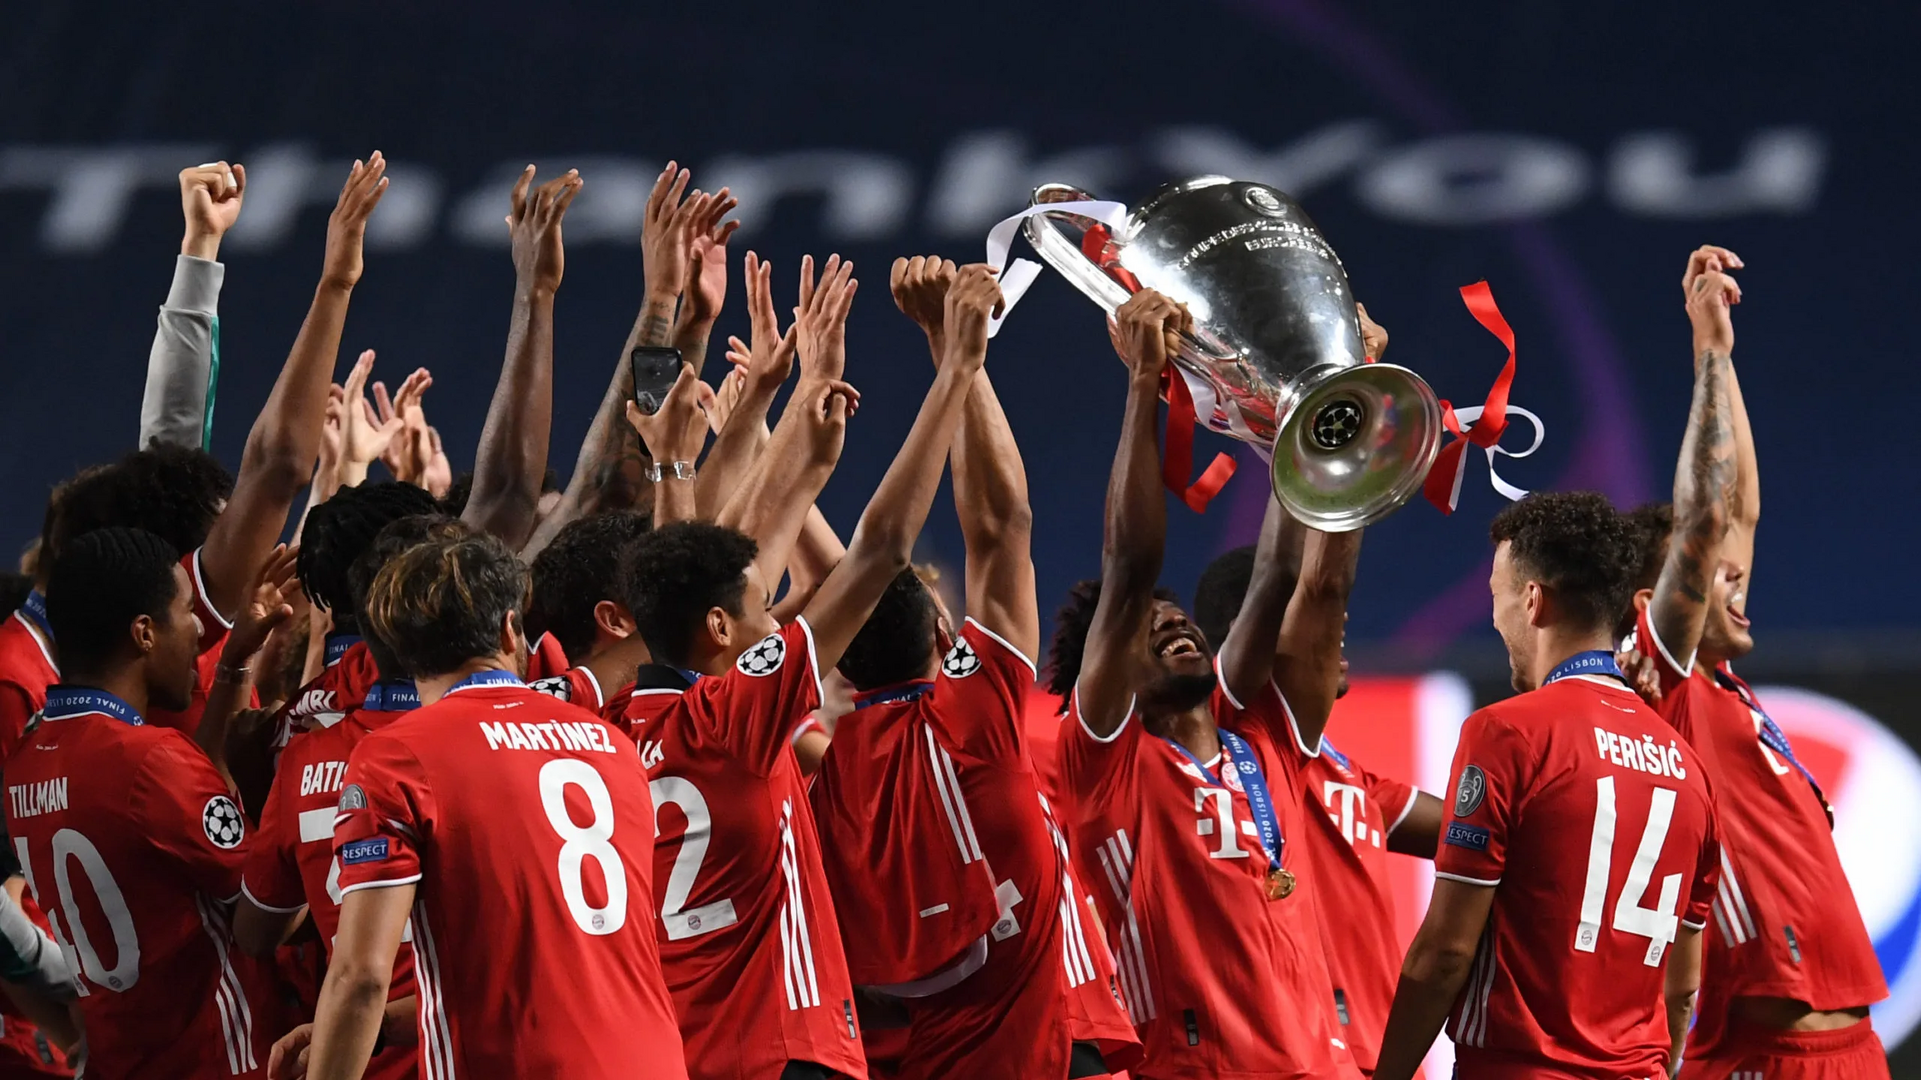 How many trophies have FC Bayern Munich won in their history?